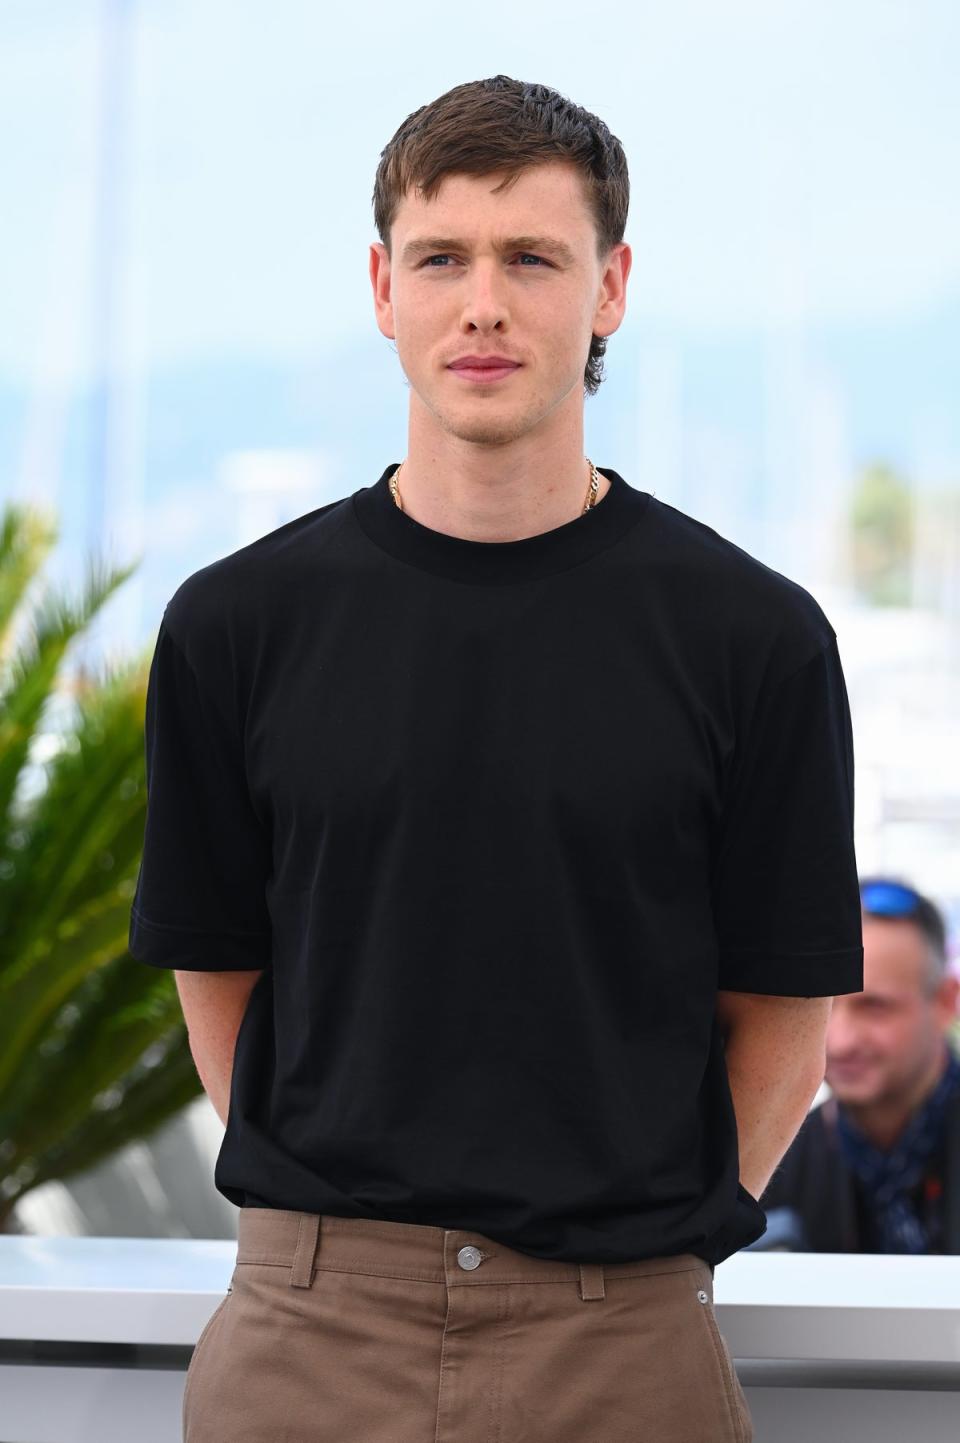 Dickinson at Cannes Film Festival 2022 (Getty Images)